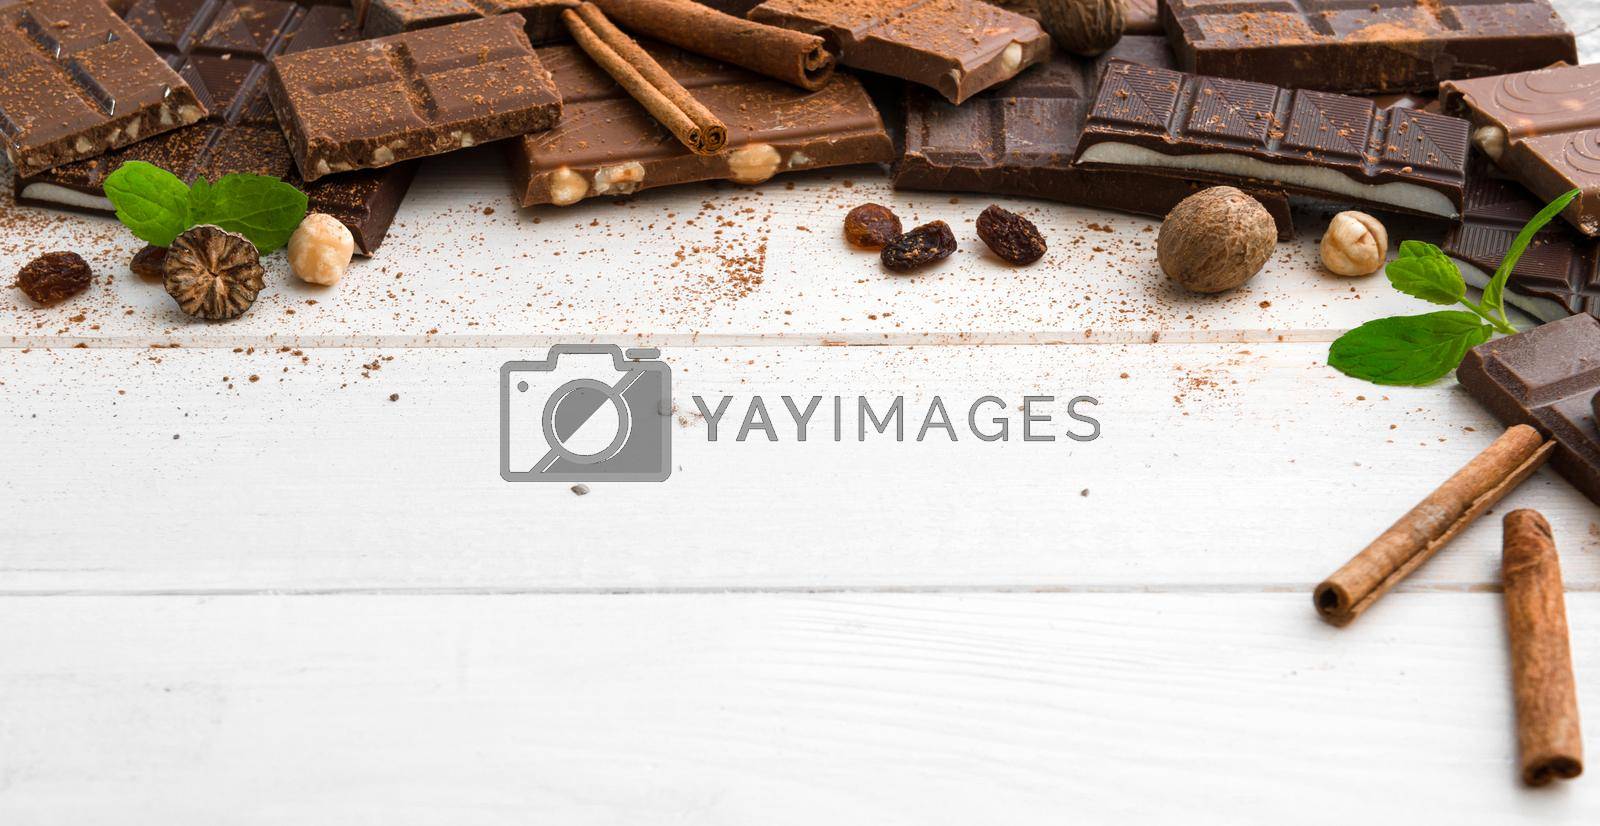 Royalty free image of variety of chocolate by tan4ikk1